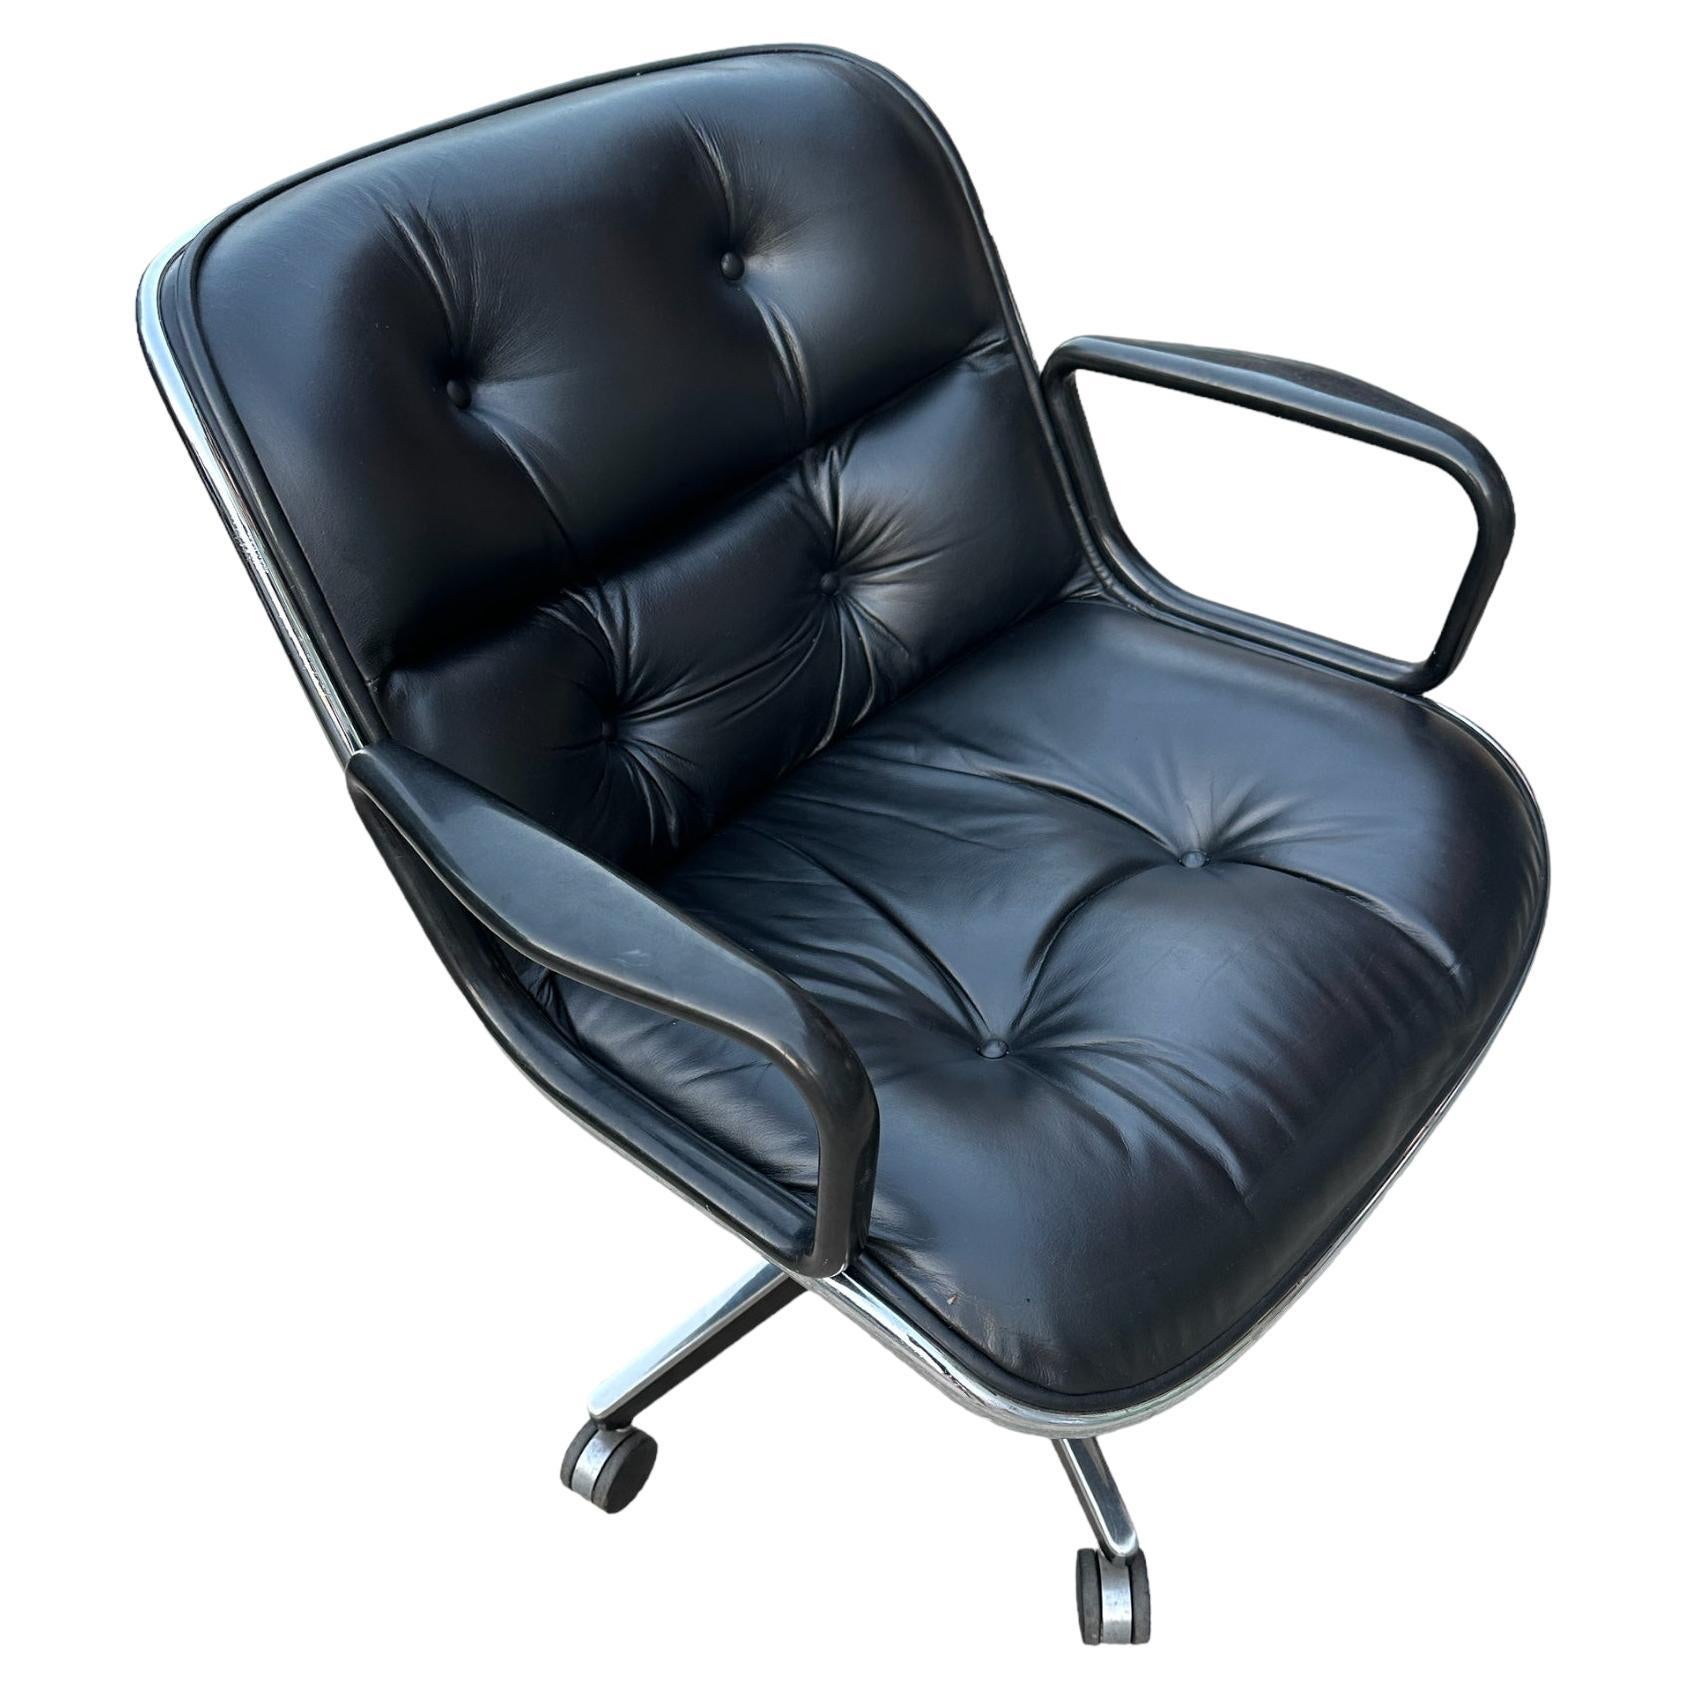 Classic black leather desk chair by Charles Pollock and manufactured by Knoll. Executed in black leather and steel base. No tears or missing buttons or screws. Leather in very good condition with even black color and sheen. Chrome tube in good